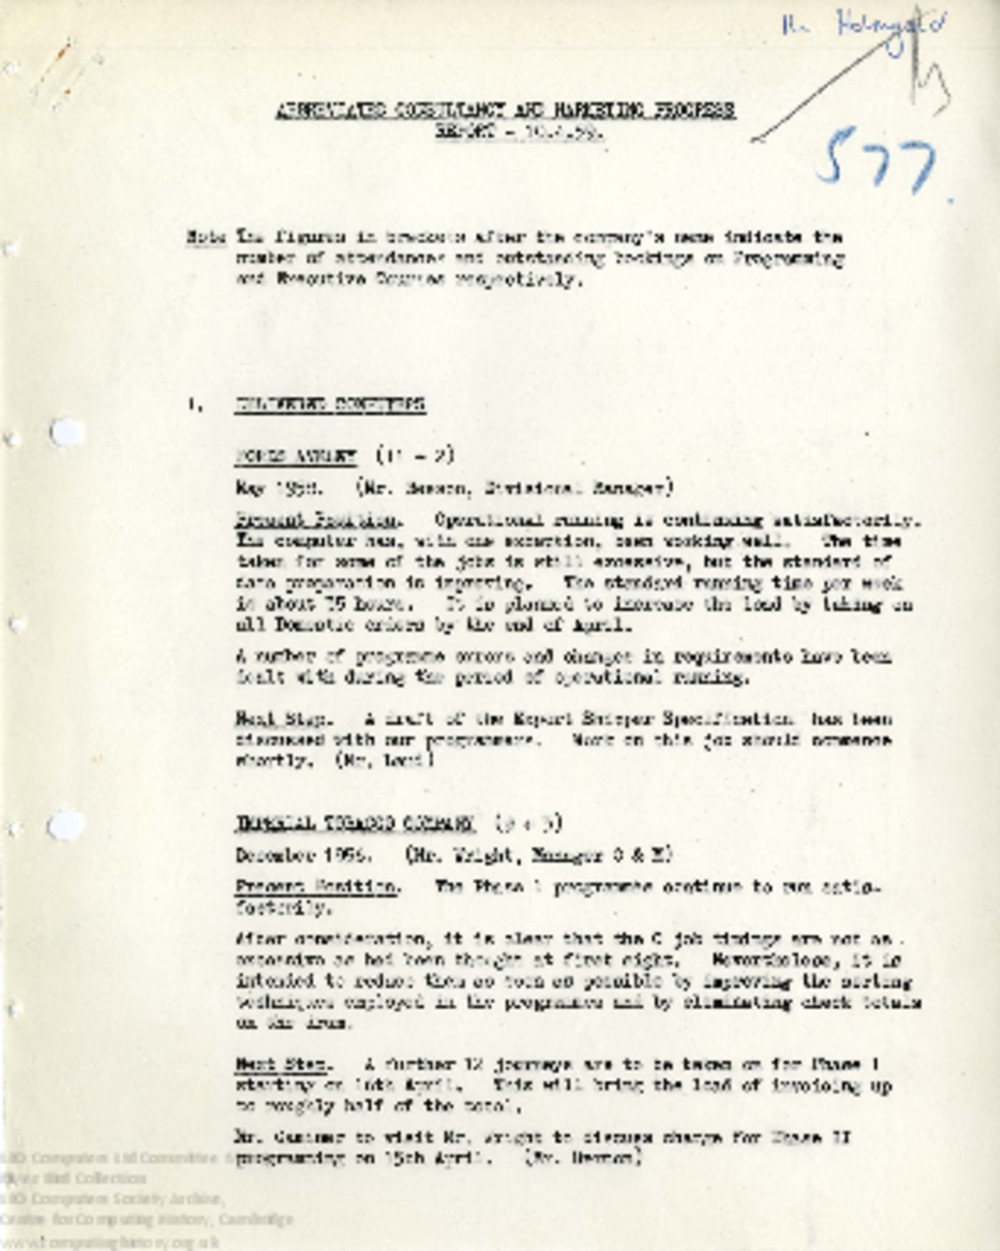 Article: 64474 Abbreviated Consultancy and Marketing Progress Report and Minutes, 10th Apr 1959